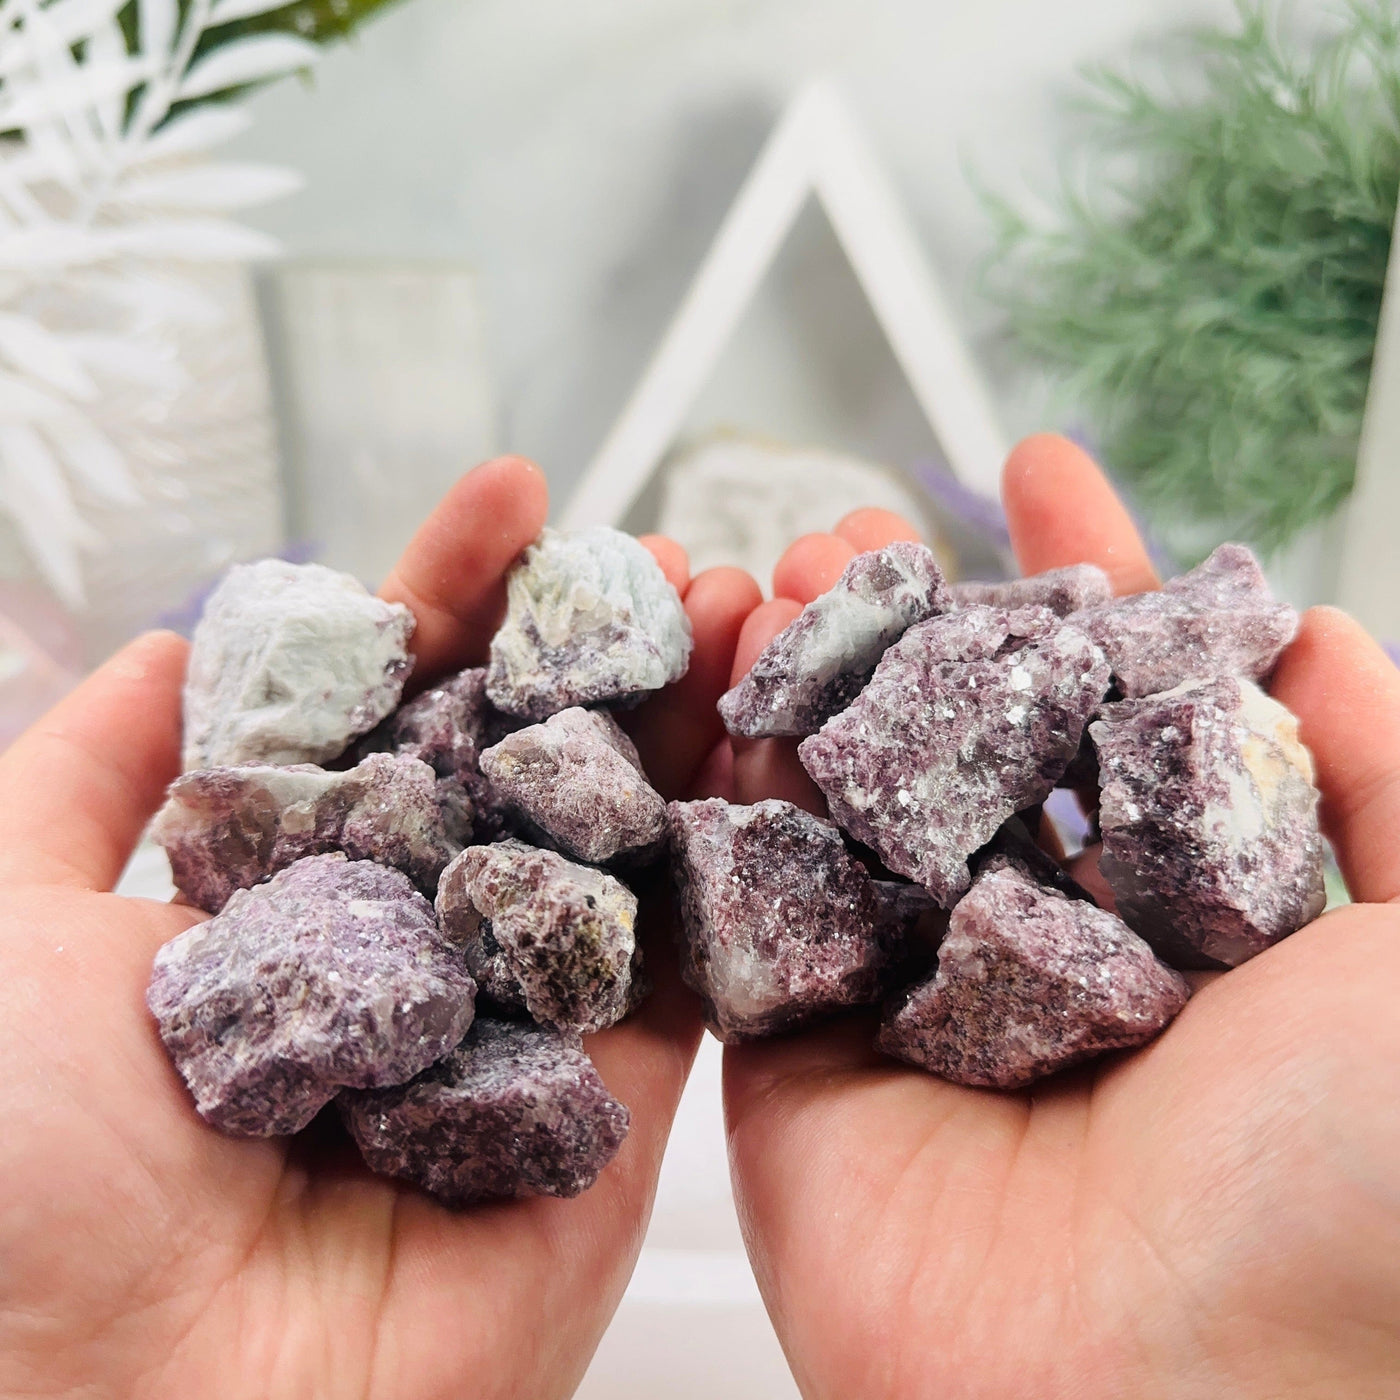 Lepidolite Chunks - Rough Stone - Natural Crystal - You Get All in hand for size reference